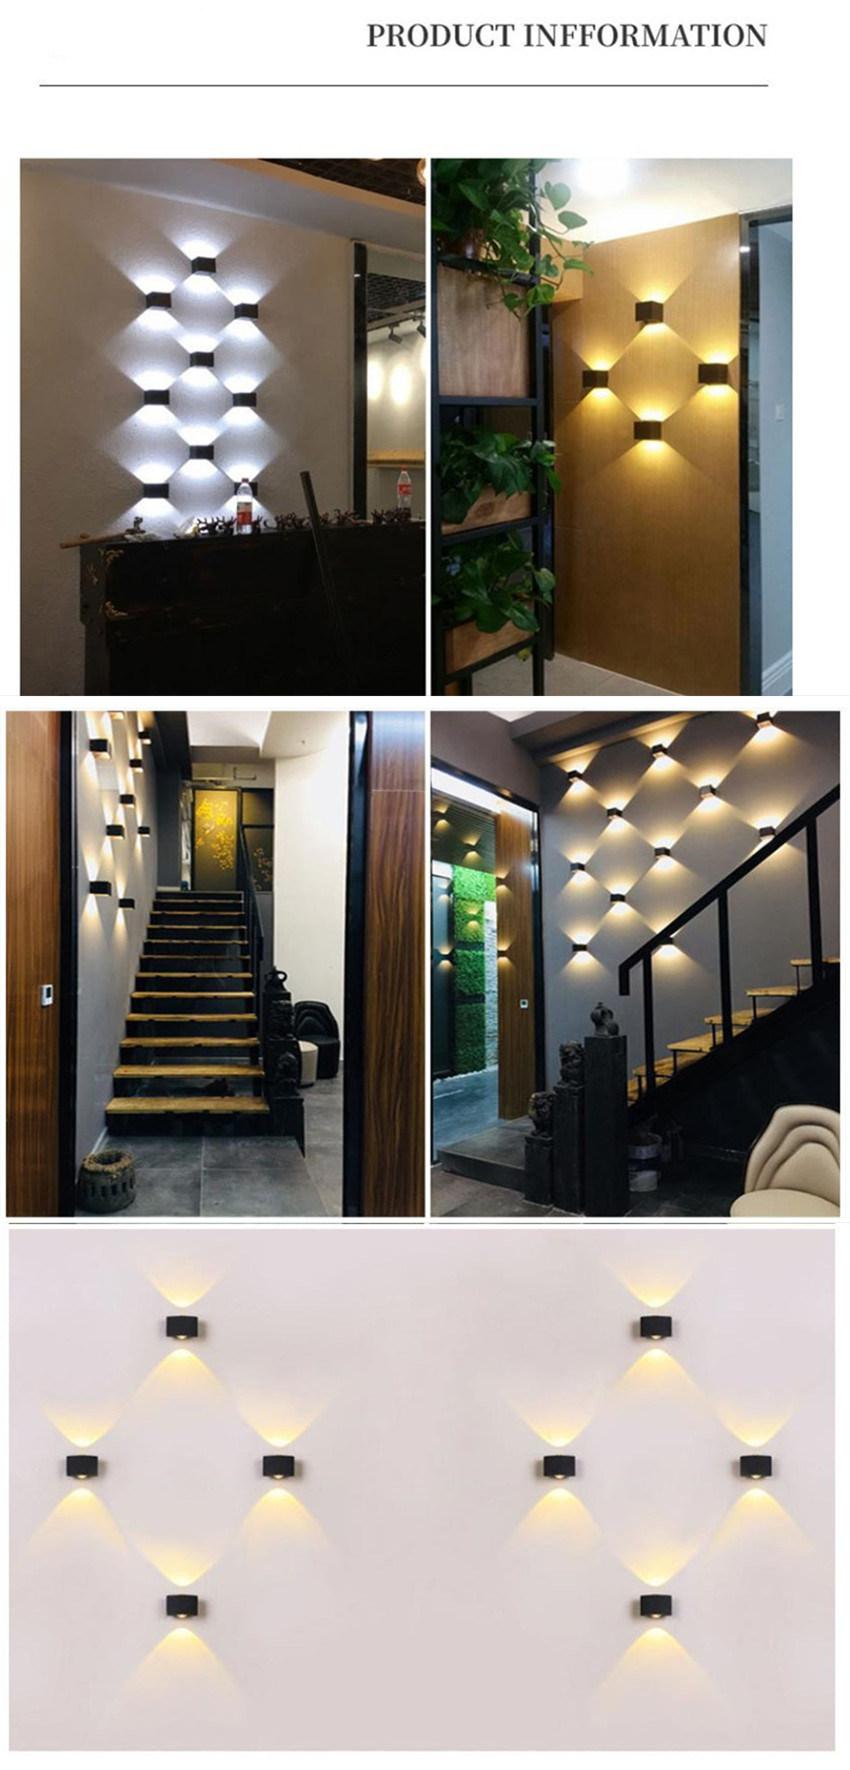 Different Shapes LED Indoor Wall Lamp with CE RoHS Certificate